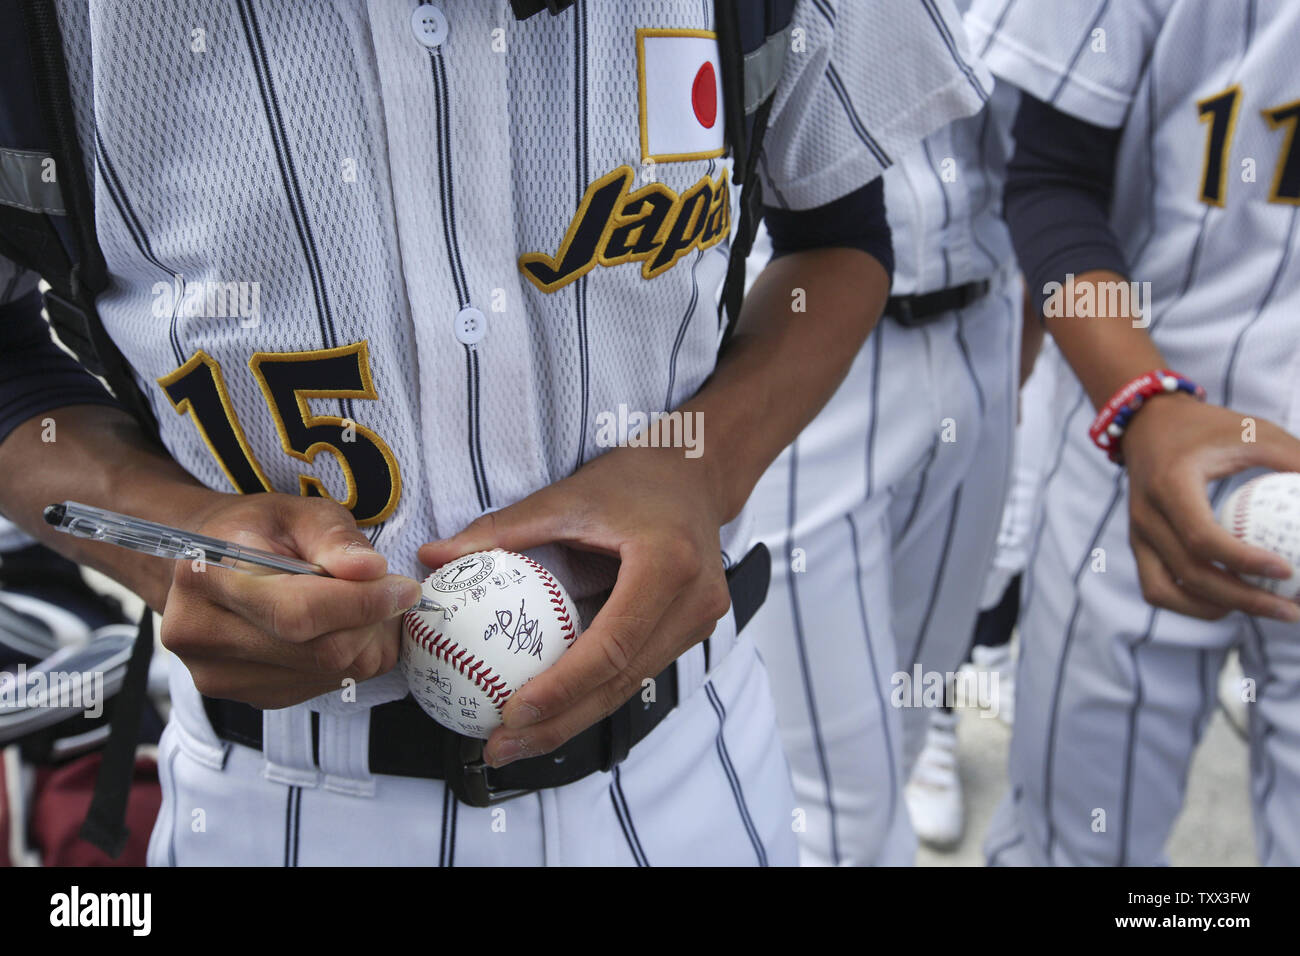 Japan's Kento Maehara autographs a ball before their first game against Los Lomas Potros for the McHenry County Youth Sports Association's 23rd annual 15-Year-Old International Championship on August 1, 2015 in Crystal Lake, Illinois.  Japan lost to Los Lomas Potros 6-4 in their first game but defeated them 3-2 in their second game to win the championship.. Photo by John Konstantaras/UPI Stock Photo